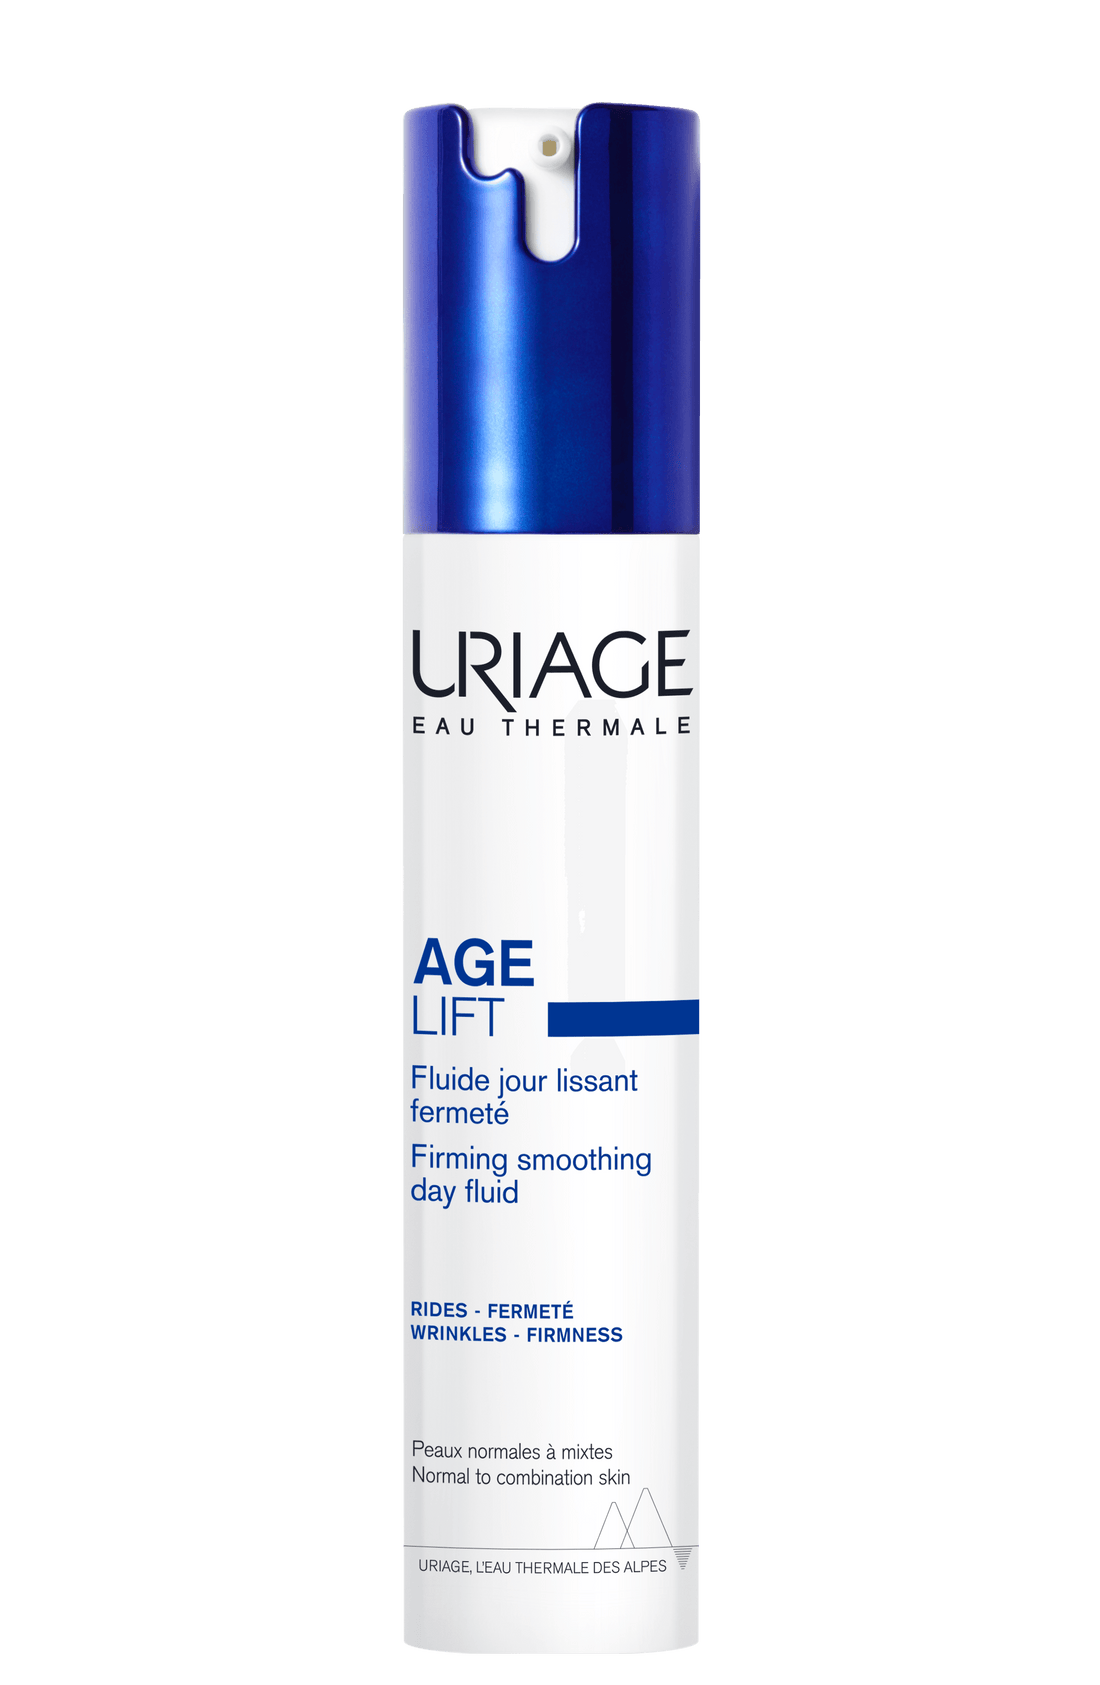 Age Lift Firming Smoothing Day Fluid 40ml URIAGE® - LASKIN